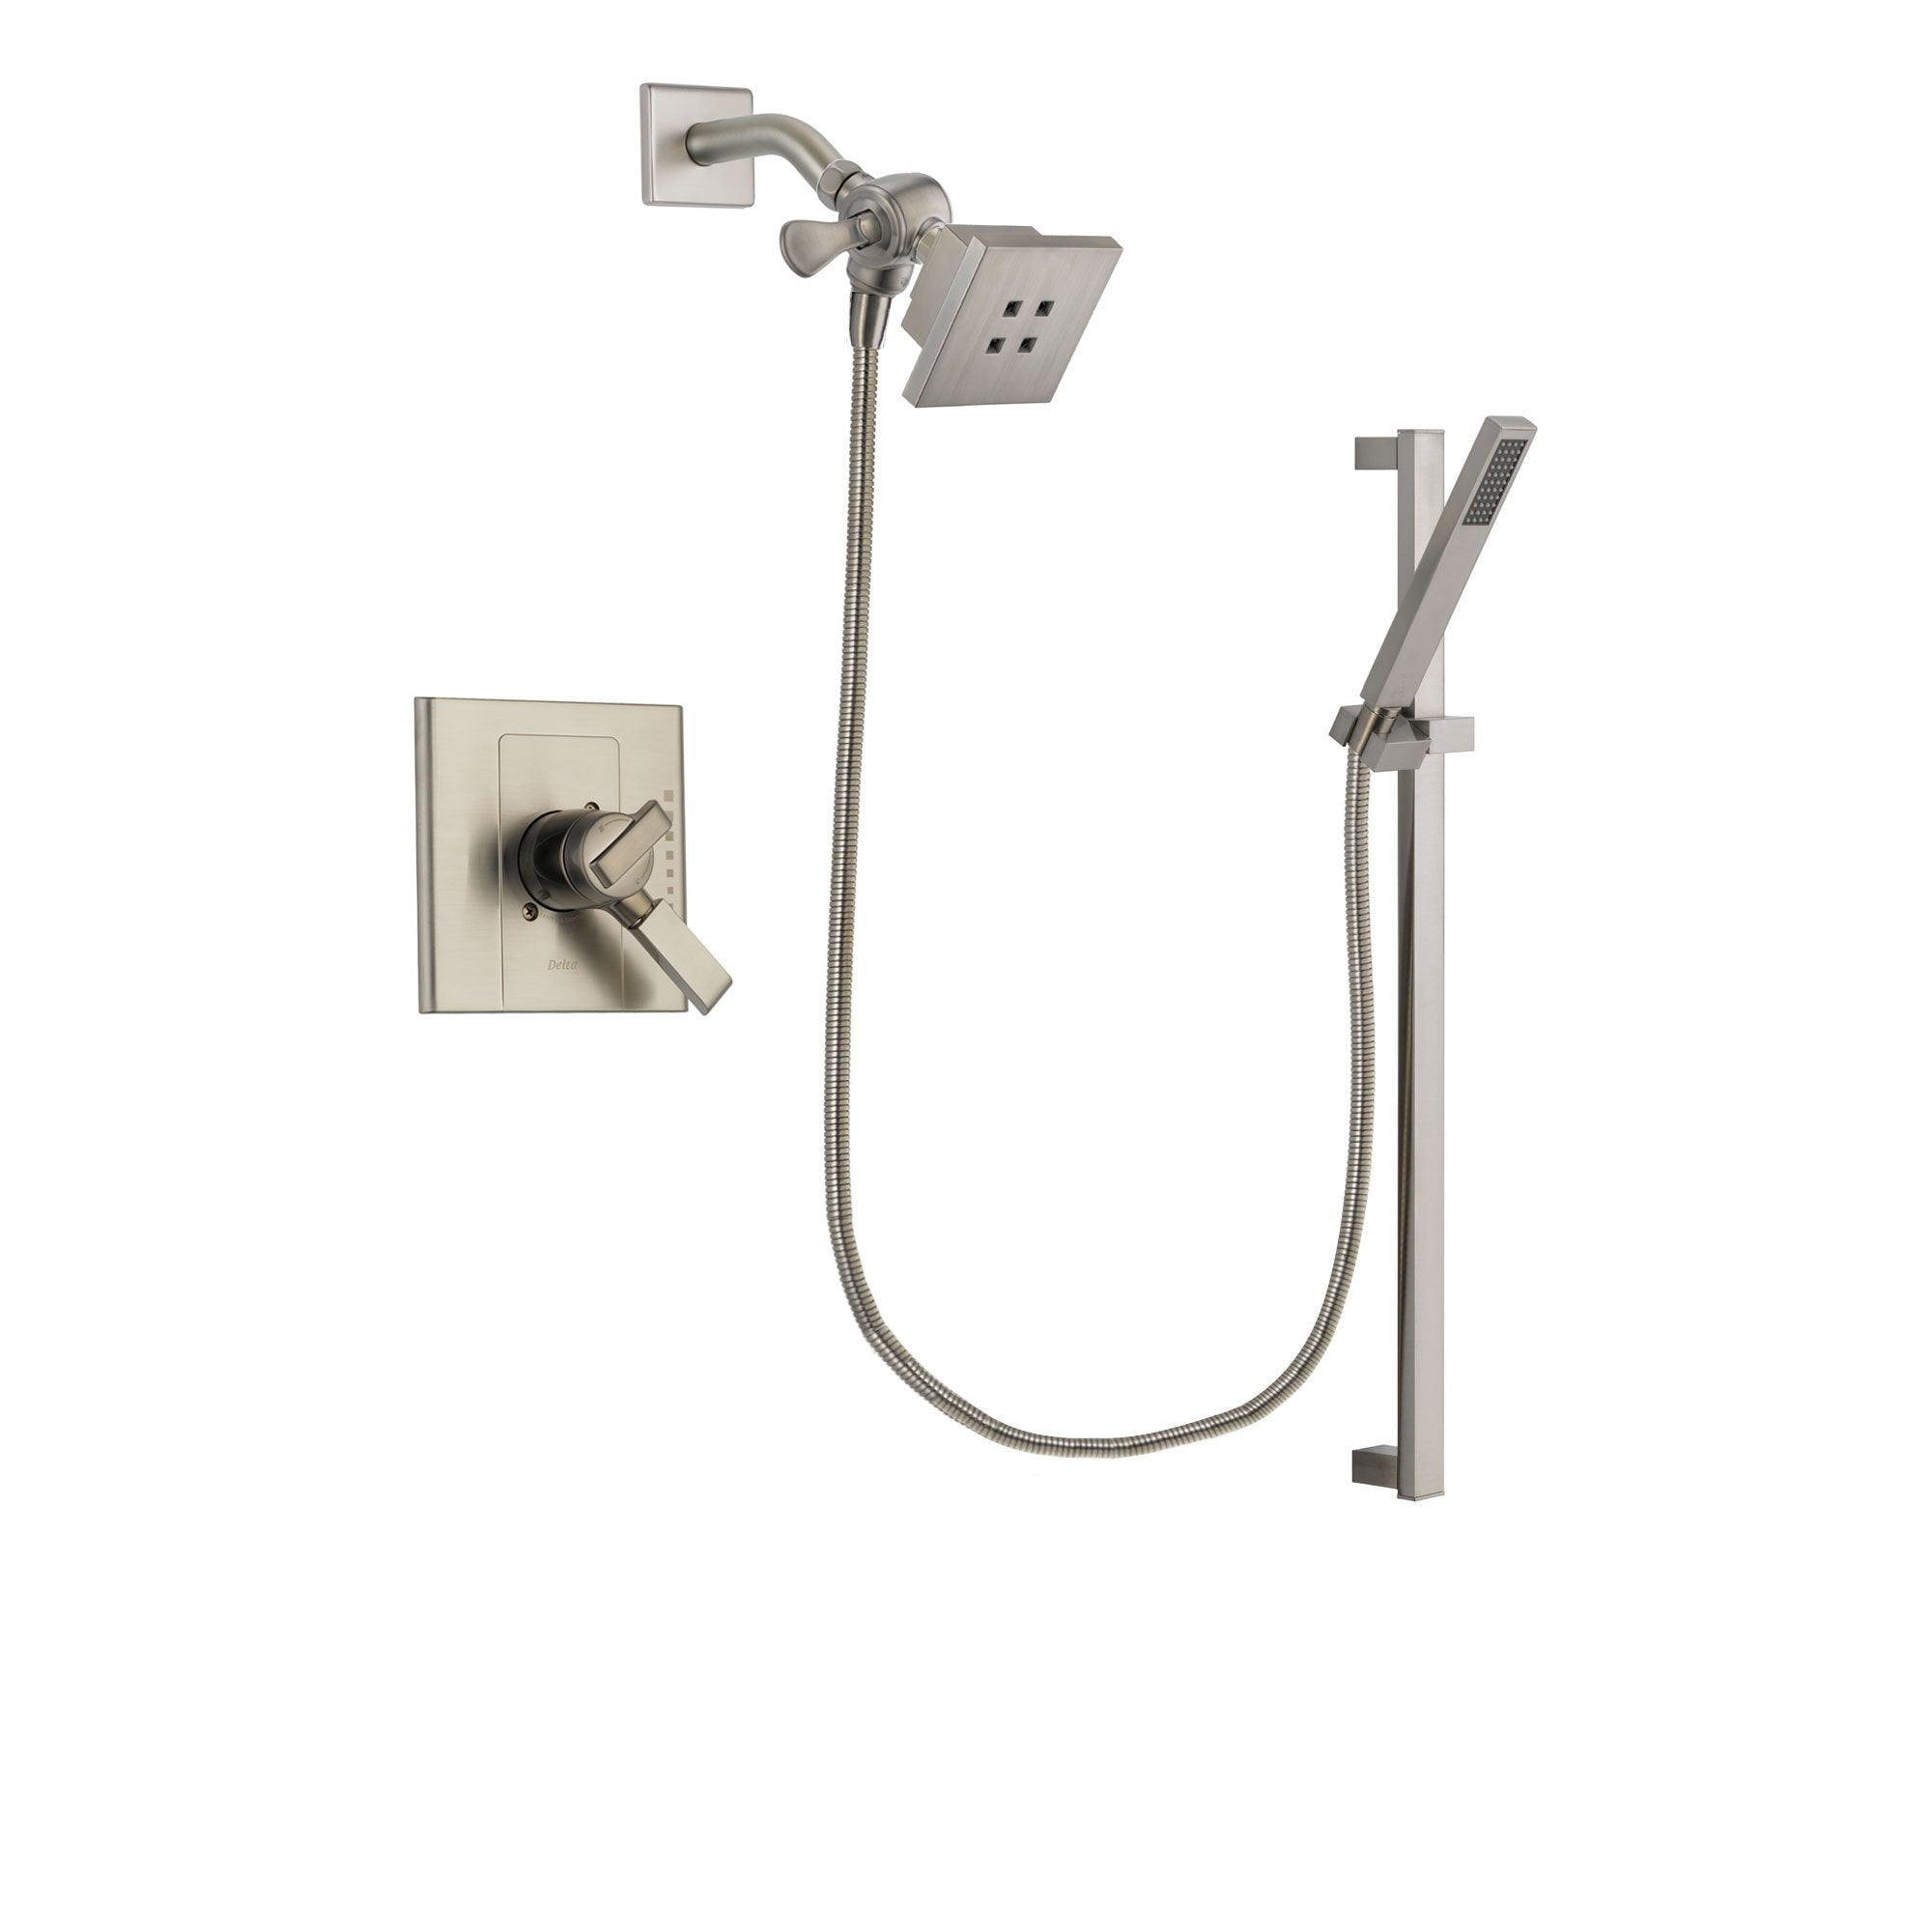 Delta Arzo Stainless Steel Finish Dual Control Shower Faucet System Package with Square Showerhead and Modern Personal Hand Shower with Slide Bar Includes Rough-in Valve DSP2344V